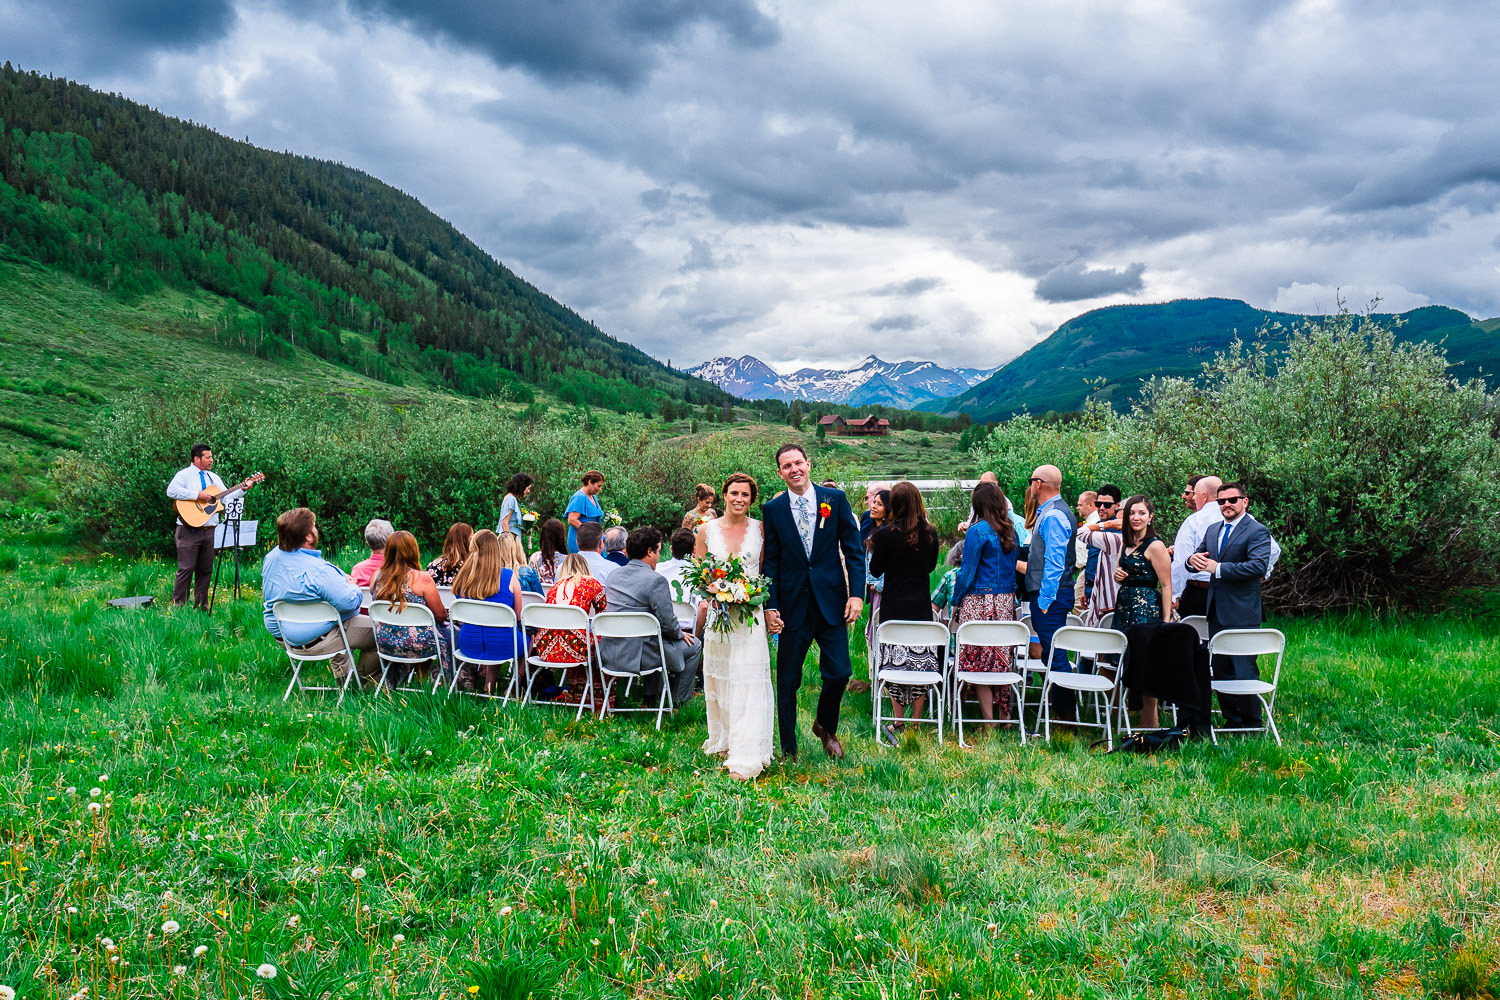 A newlywed couple walking down the aisle outdoors with guests on either side and a mountainous backdrop.